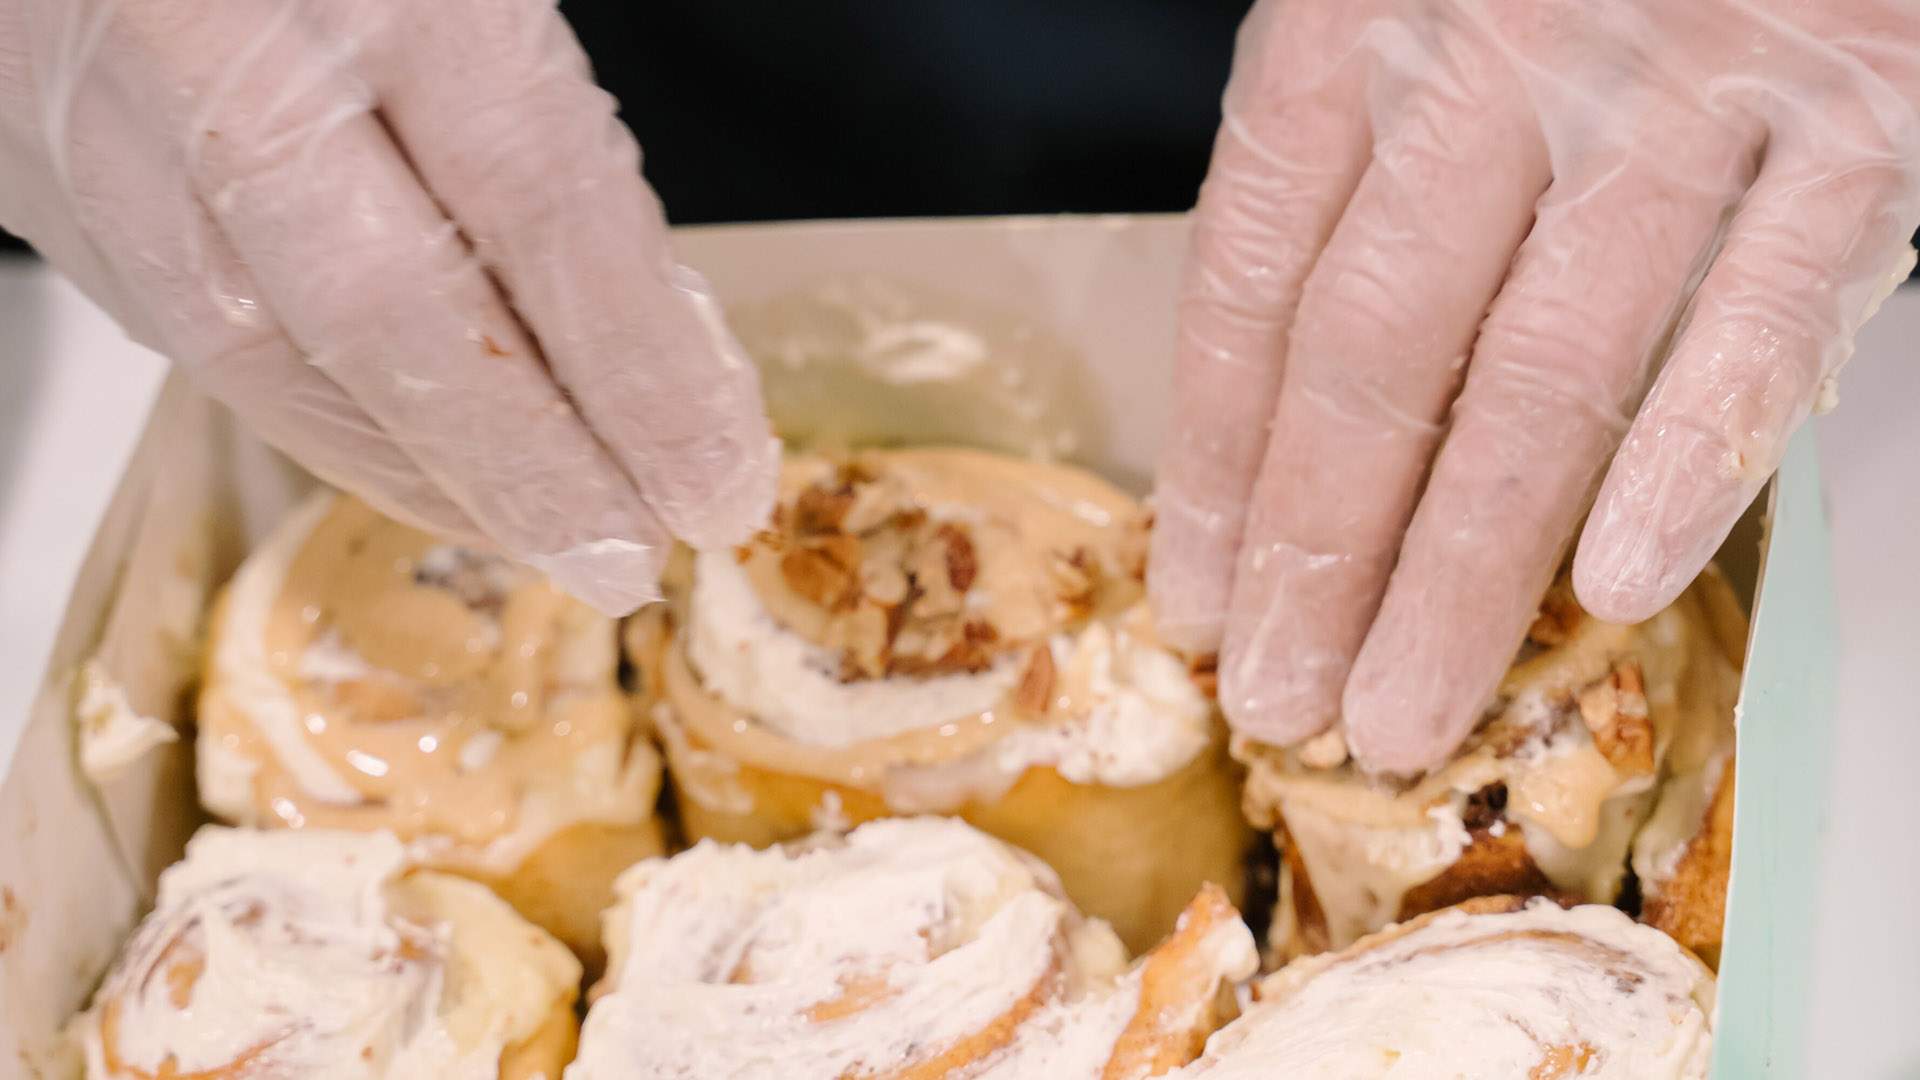 Cinnabon Is Opening Its Third Sticky Scroll-Slinging Brisbane Store in Indooroopilly